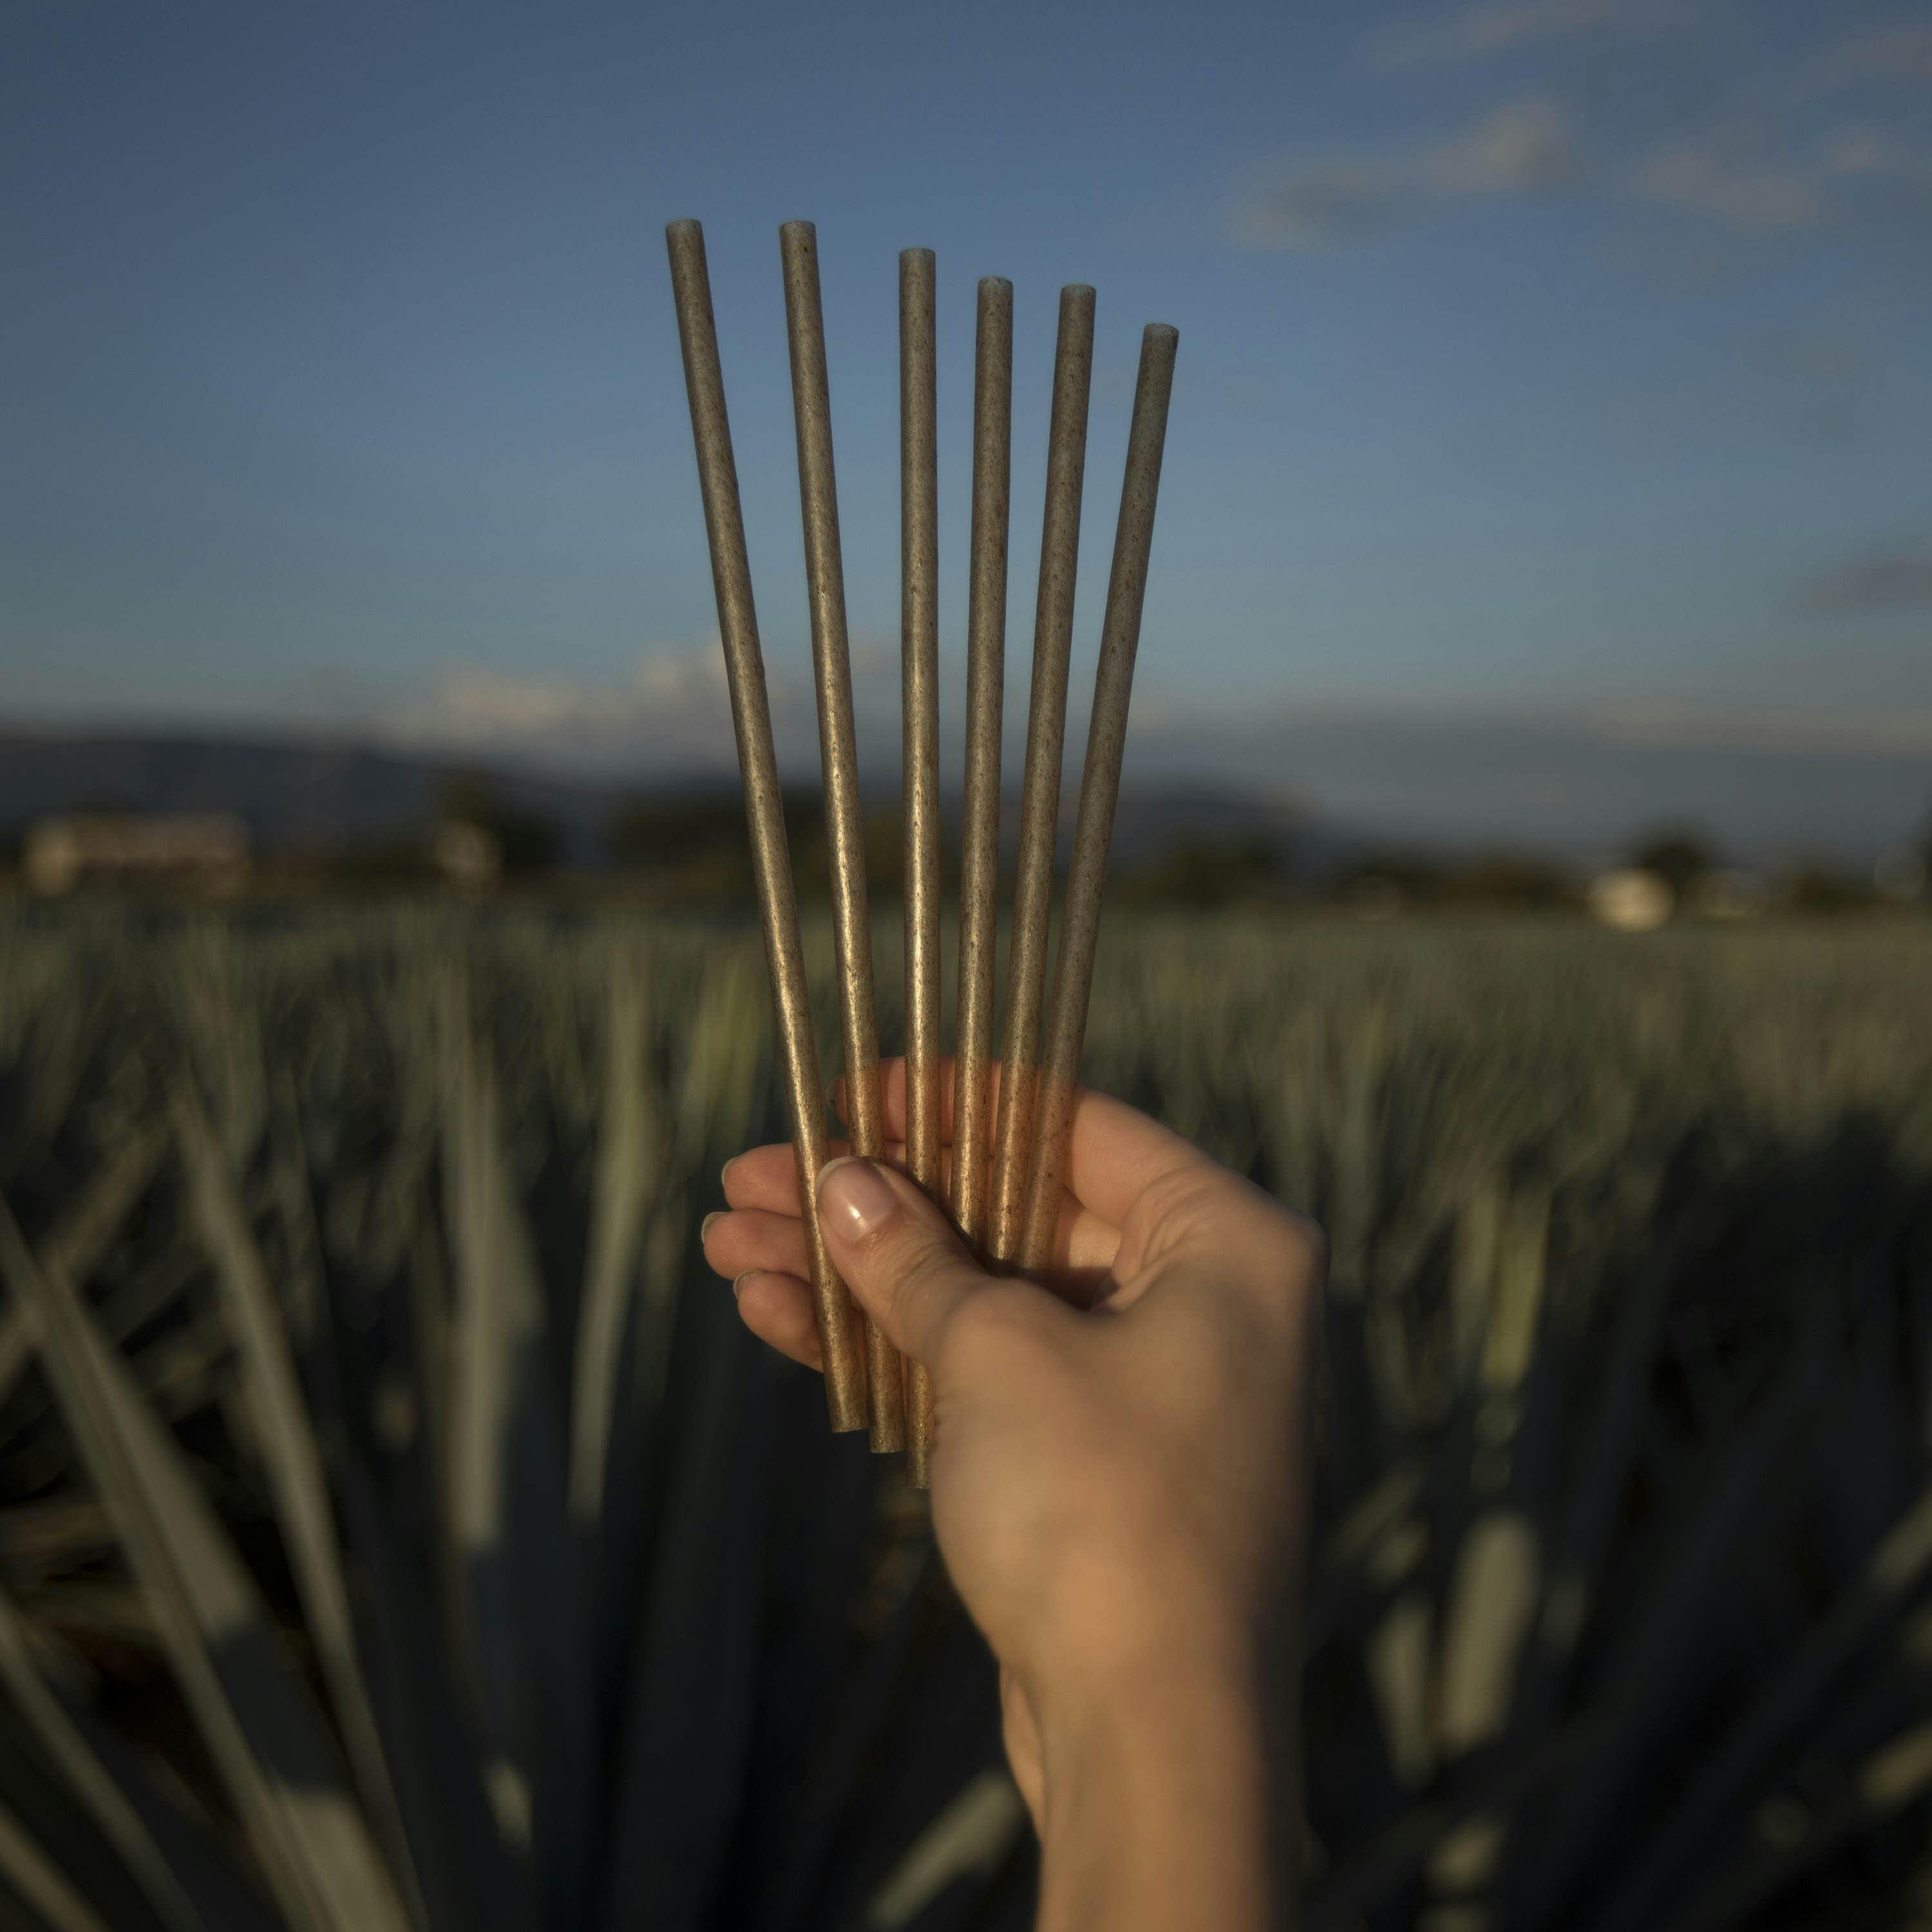 https://lp-cms-production.imgix.net/image_browser/Agave%20straws.jpg